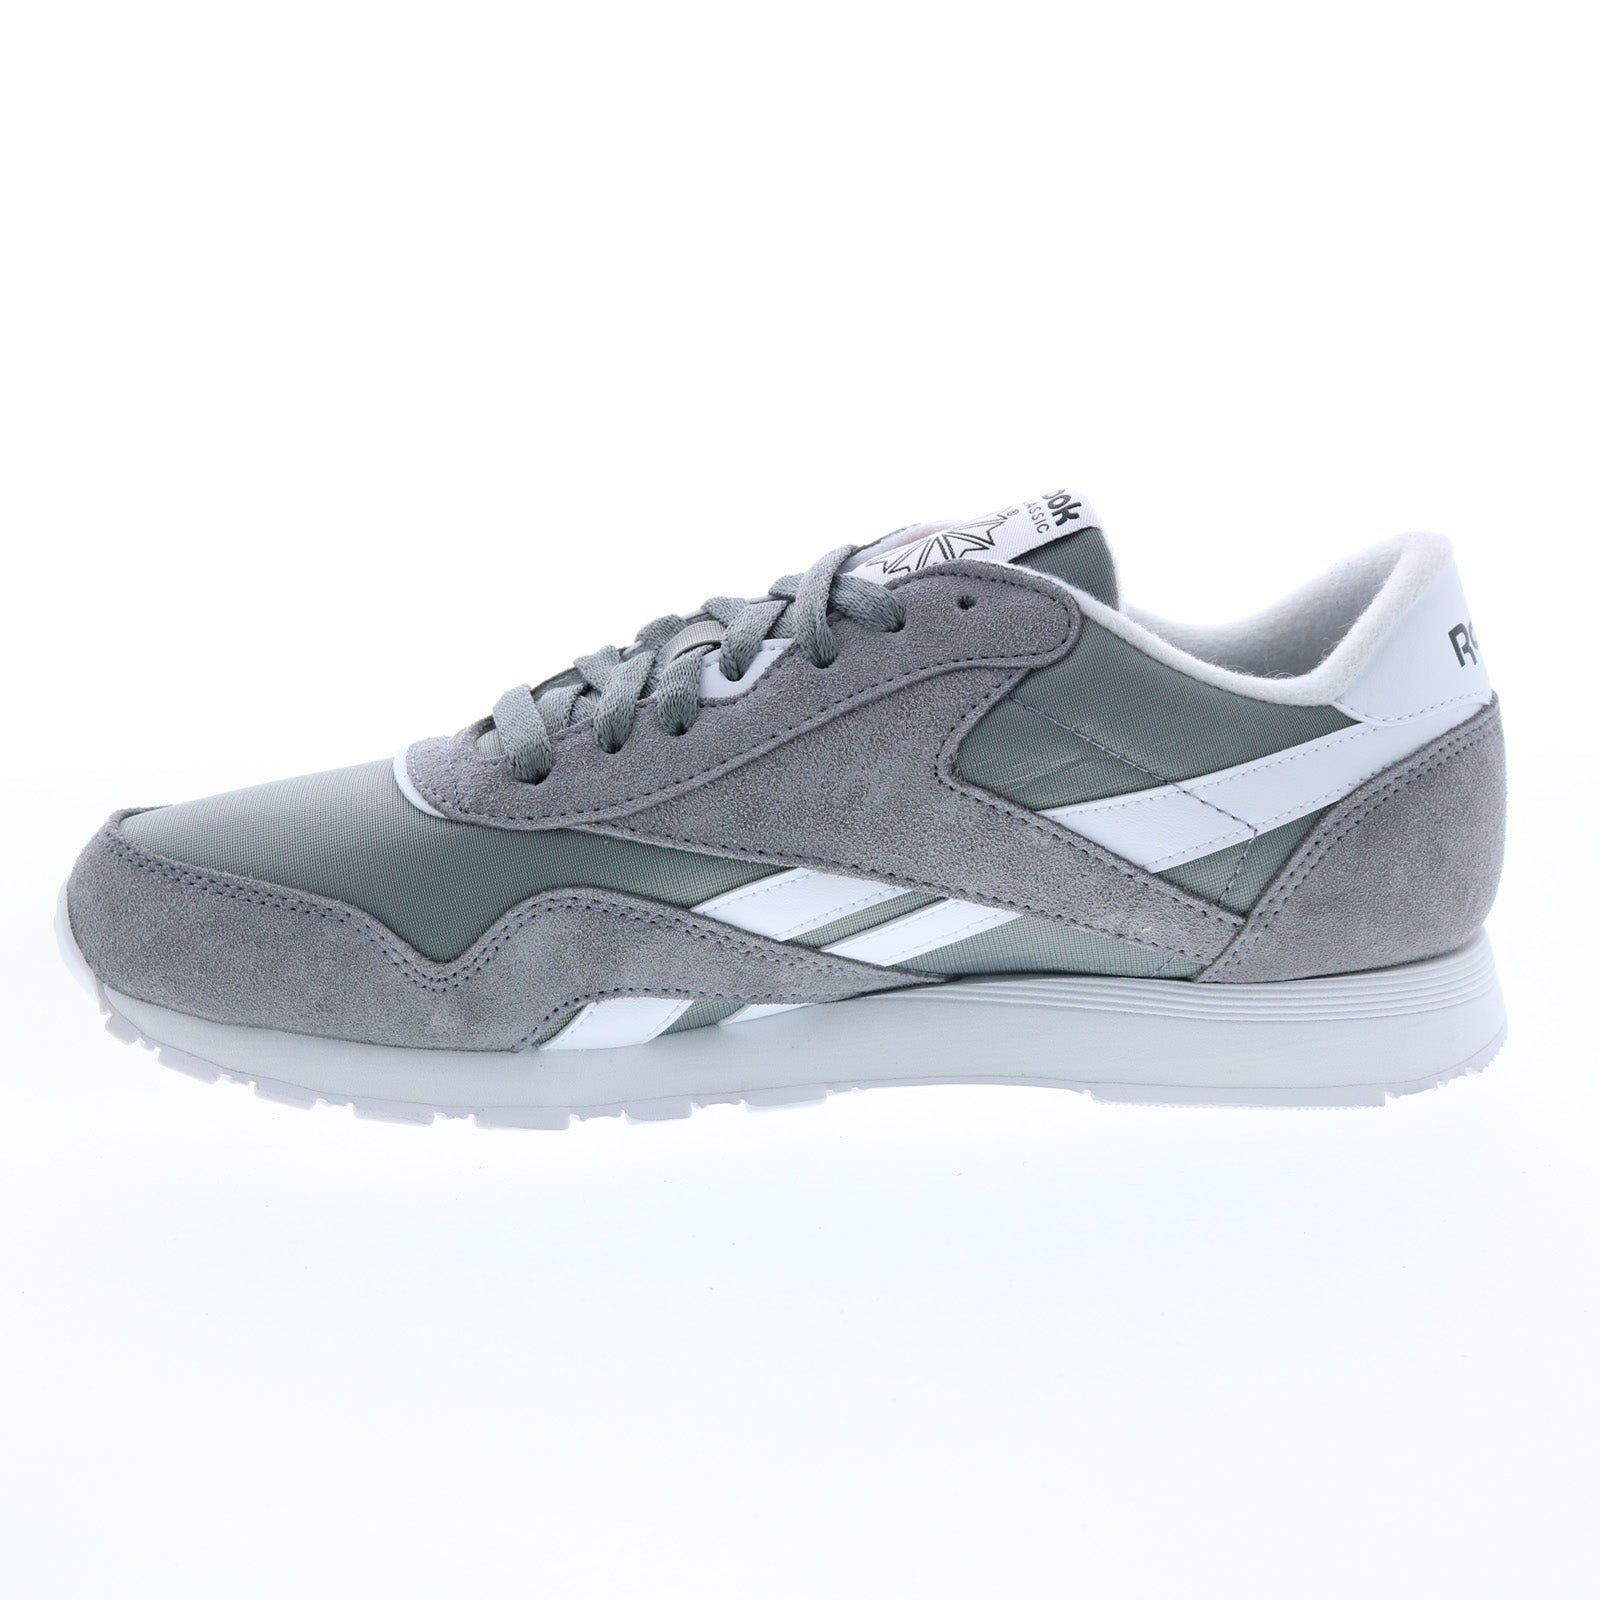 Reebok Classic Nylon GY7233 Mens Gray Suede Lifestyle Sneakers - Ruze Shoes